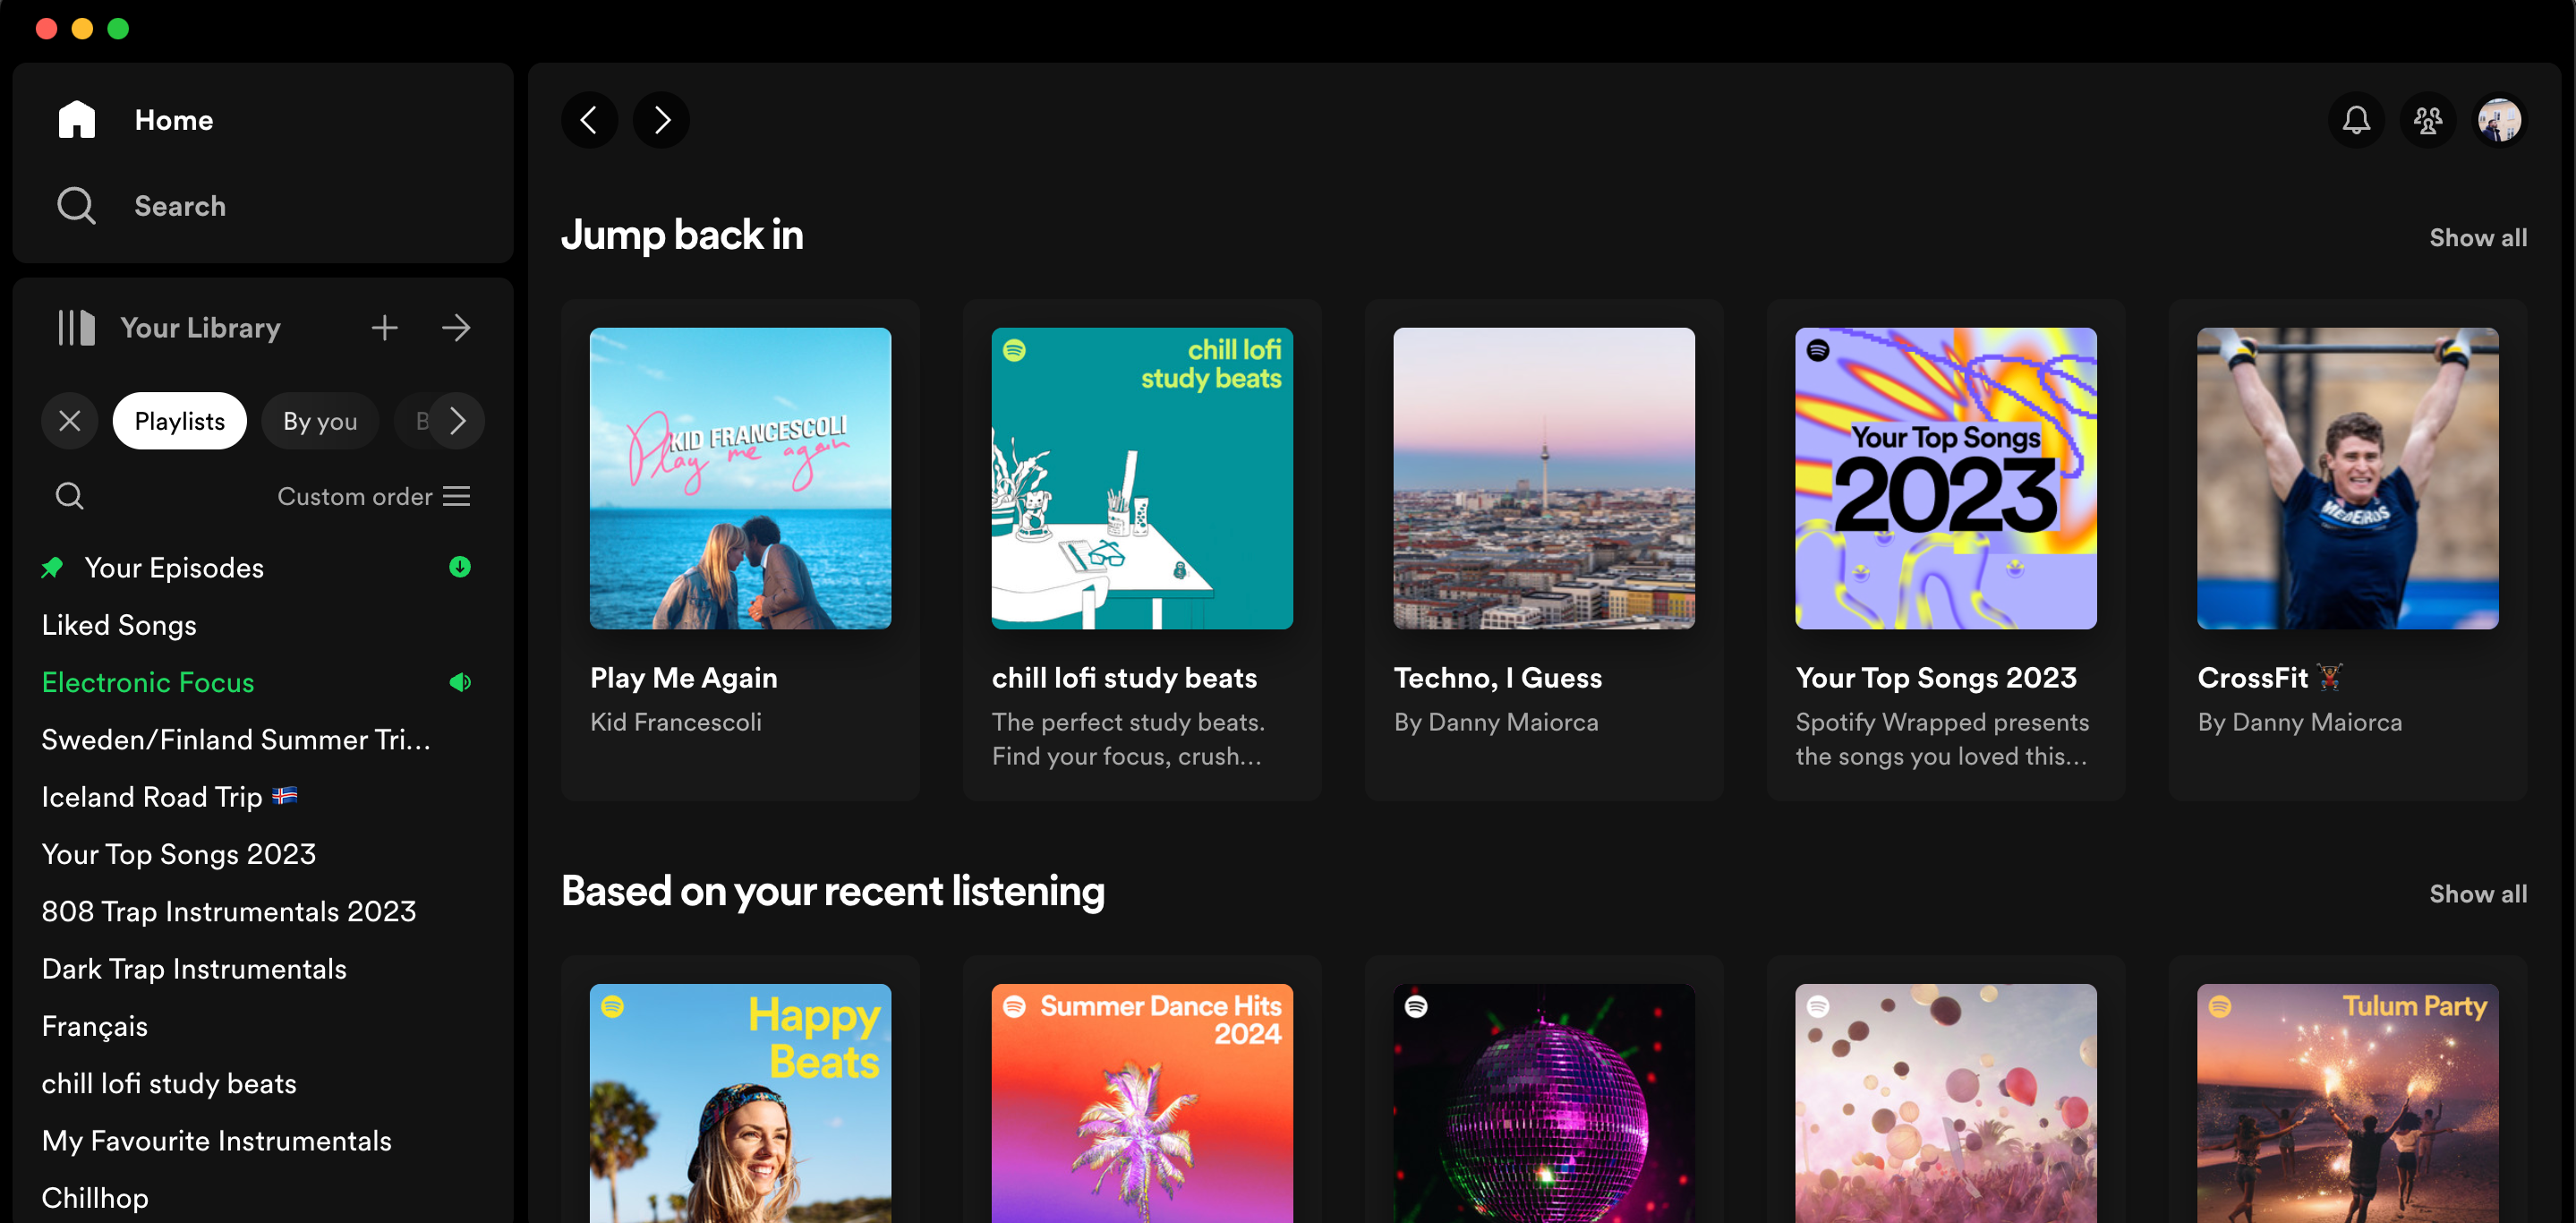 Organize your library within the Spotify app